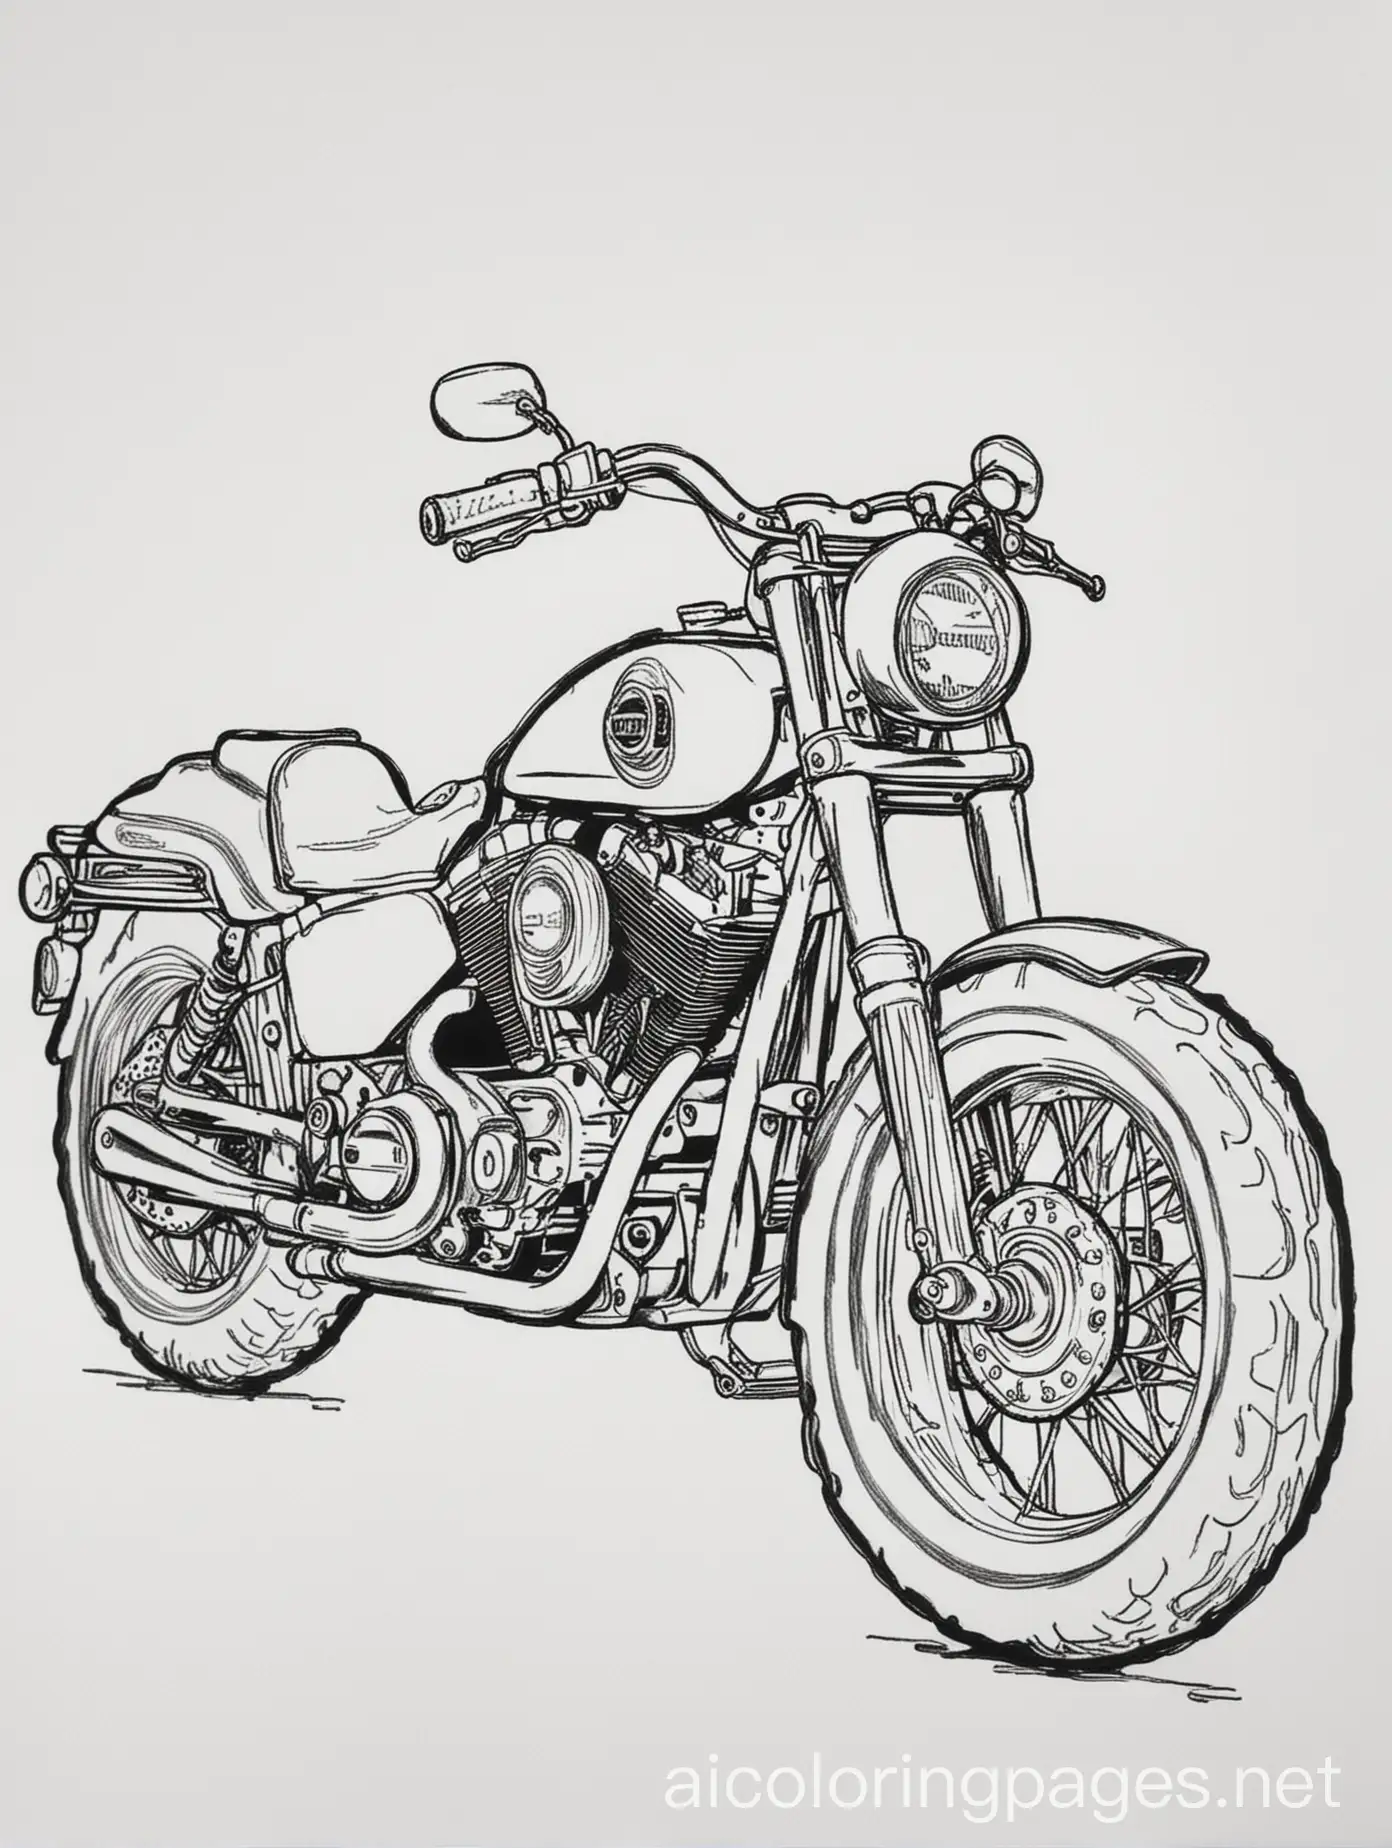 Harley-Motorcycle-Coloring-Page-Big-Chrome-Bike-on-Scenic-Winding-Road